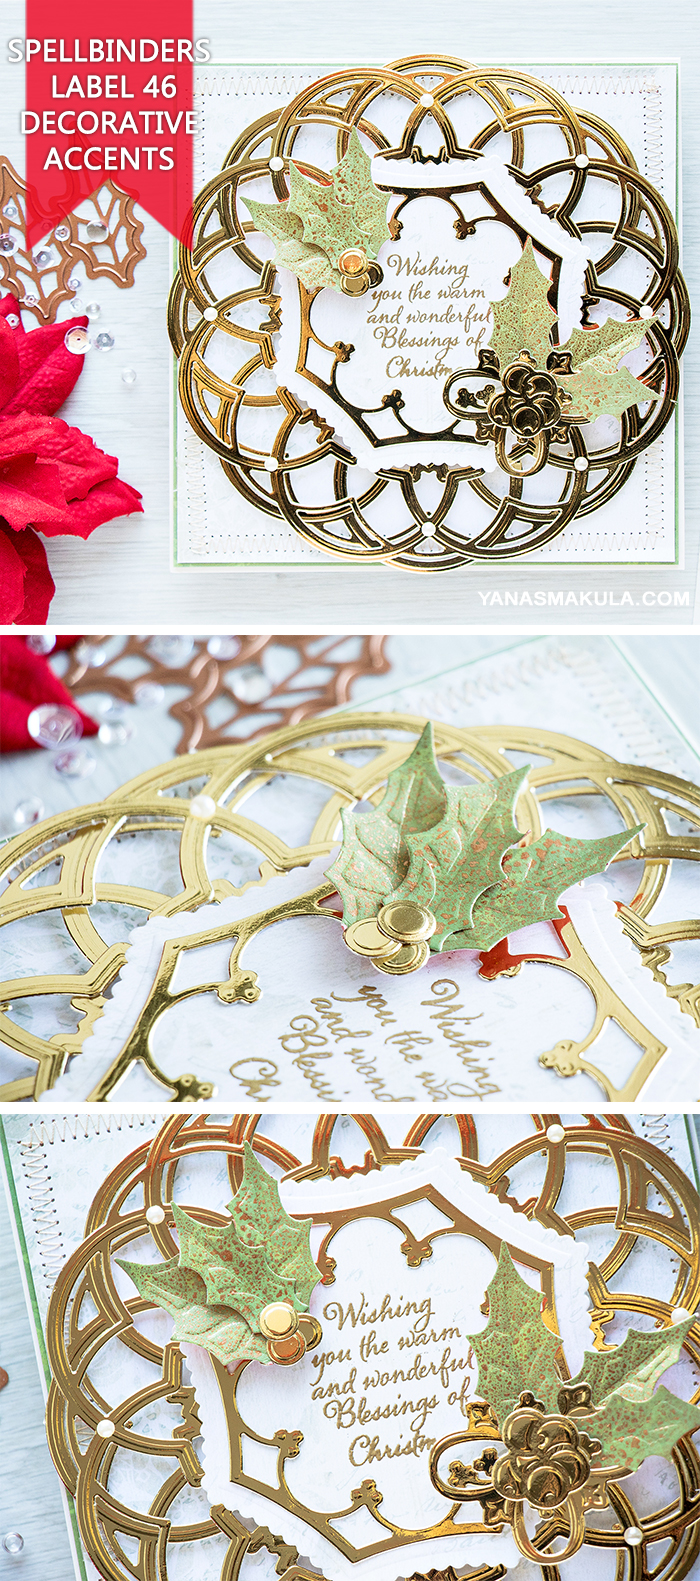 Spellbinders | Layered Holiday Card with Label 46 Decorative Accents Dies. Video tutorial by Yana Smaklua